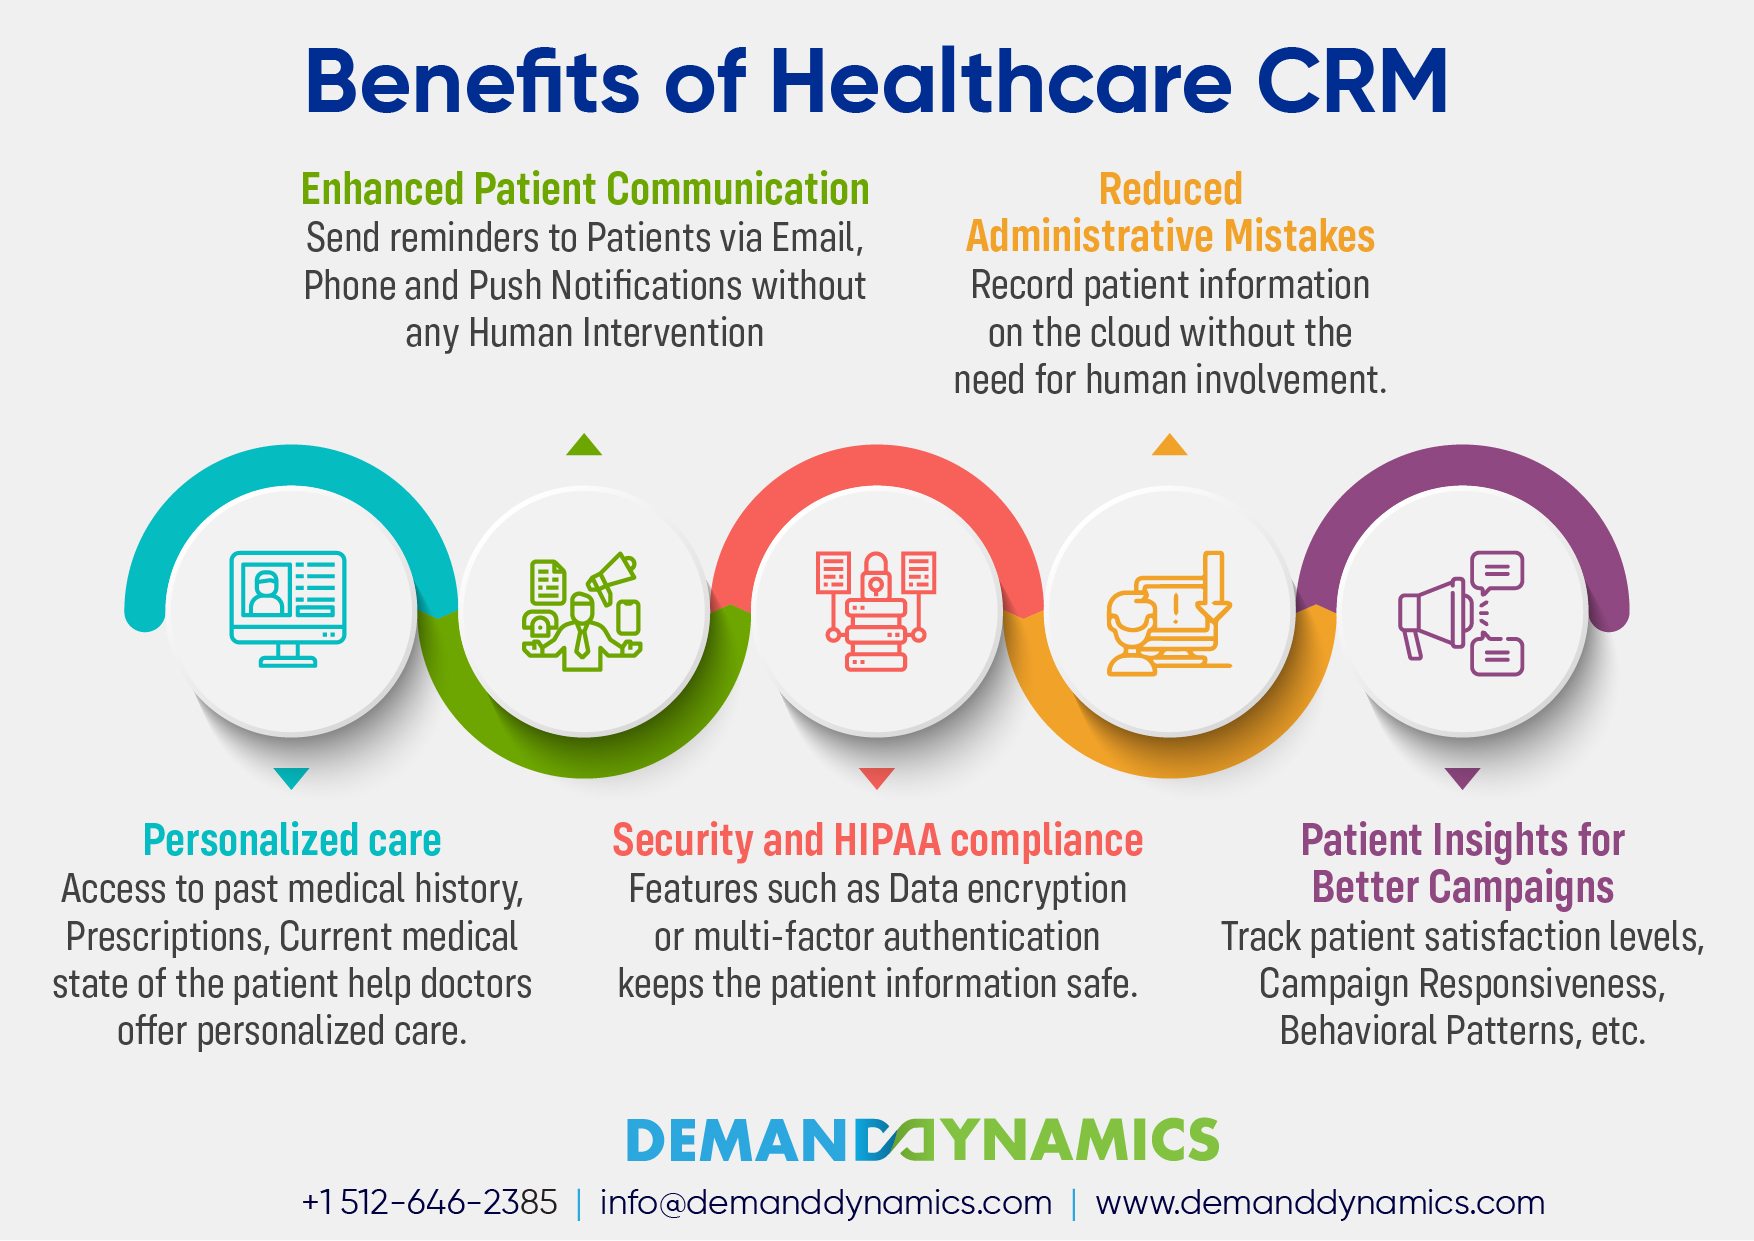 Benefits of CRM in Healthcare